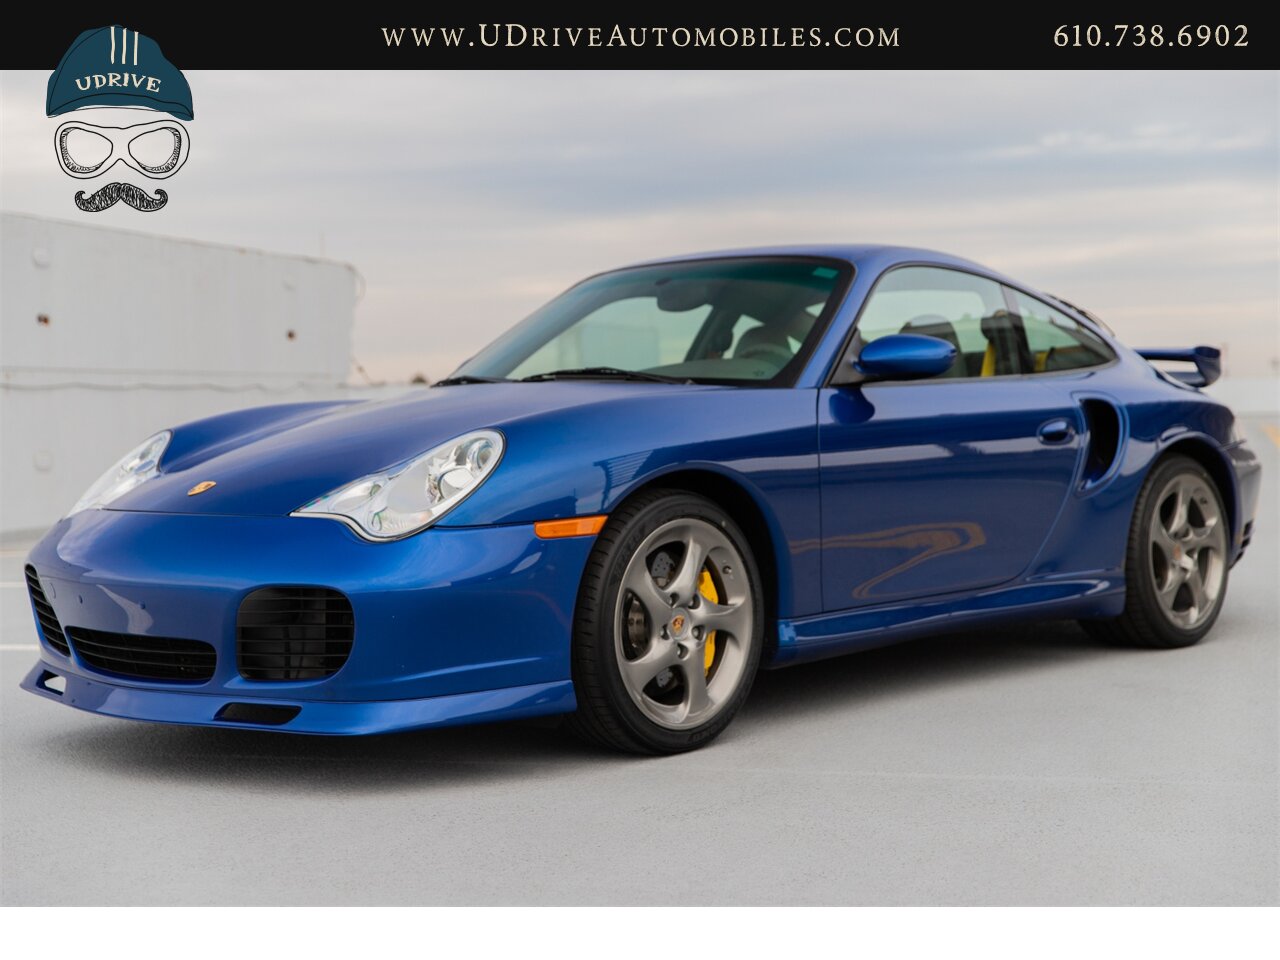 2005 Porsche 911 Turbo S Factory Aerokit Extremely Rare Cobalt Blue  Yellow Deviating Stitching 1 of a Kind Spec $160k MSRP - Photo 11 - West Chester, PA 19382